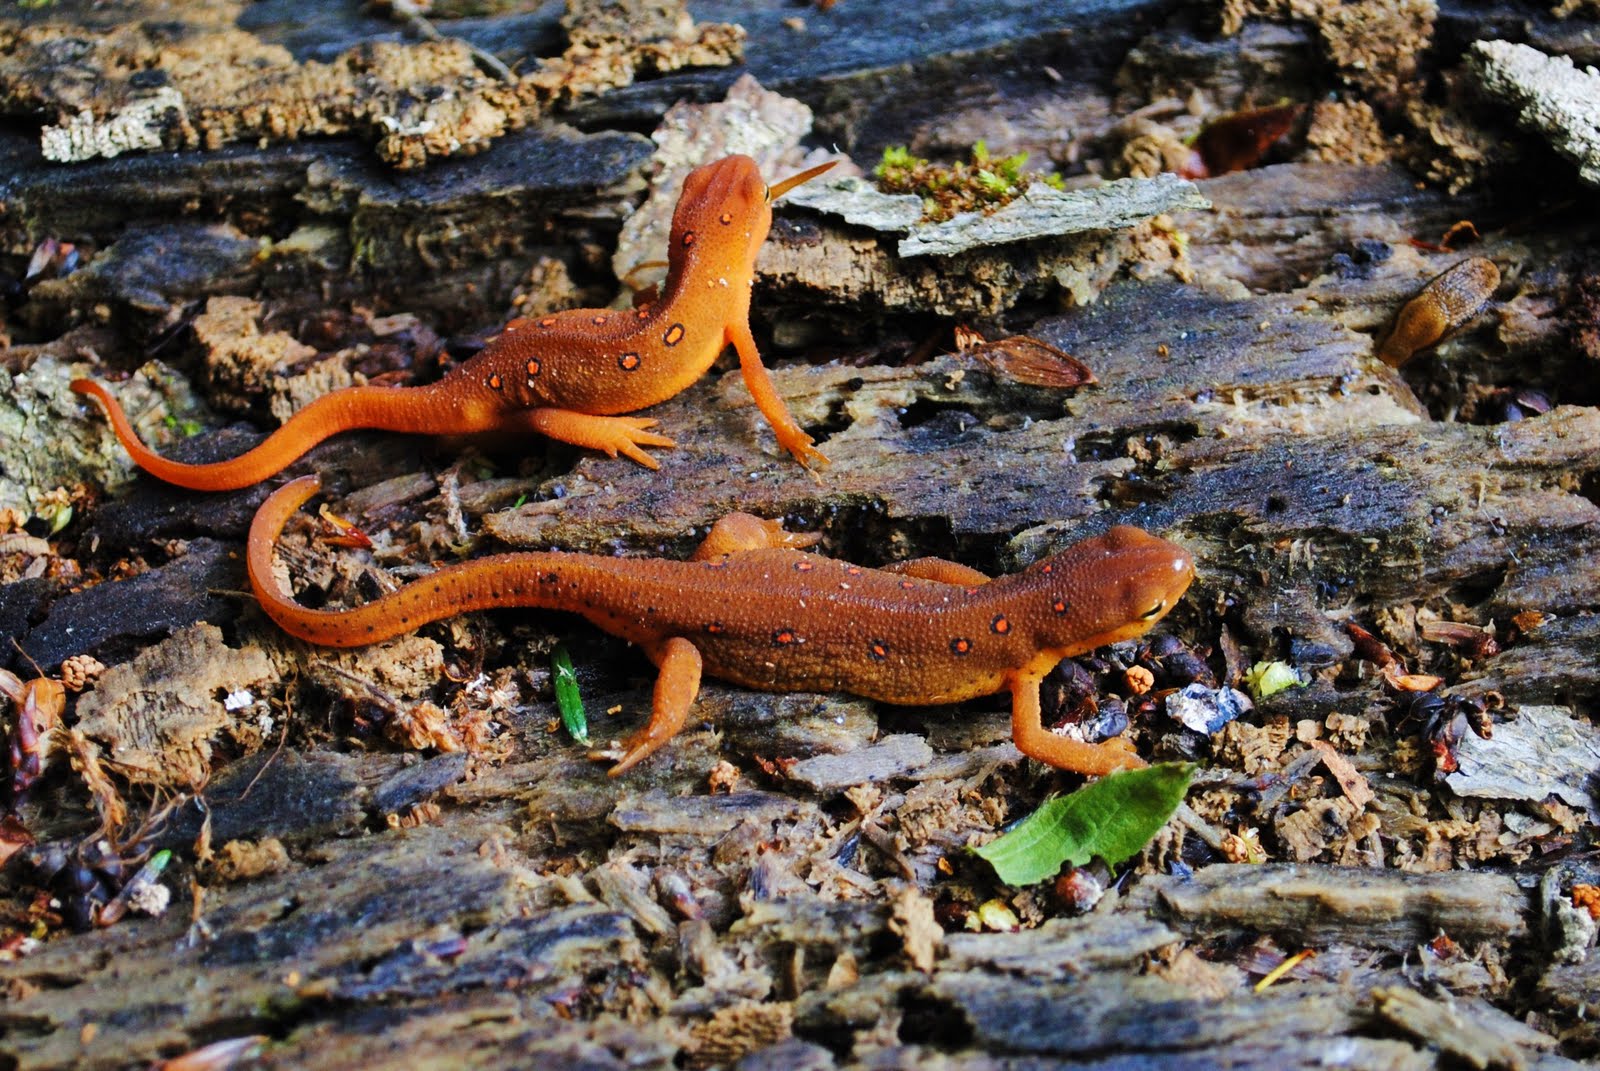 pair of newts that were sitting on a log over looking the stream.